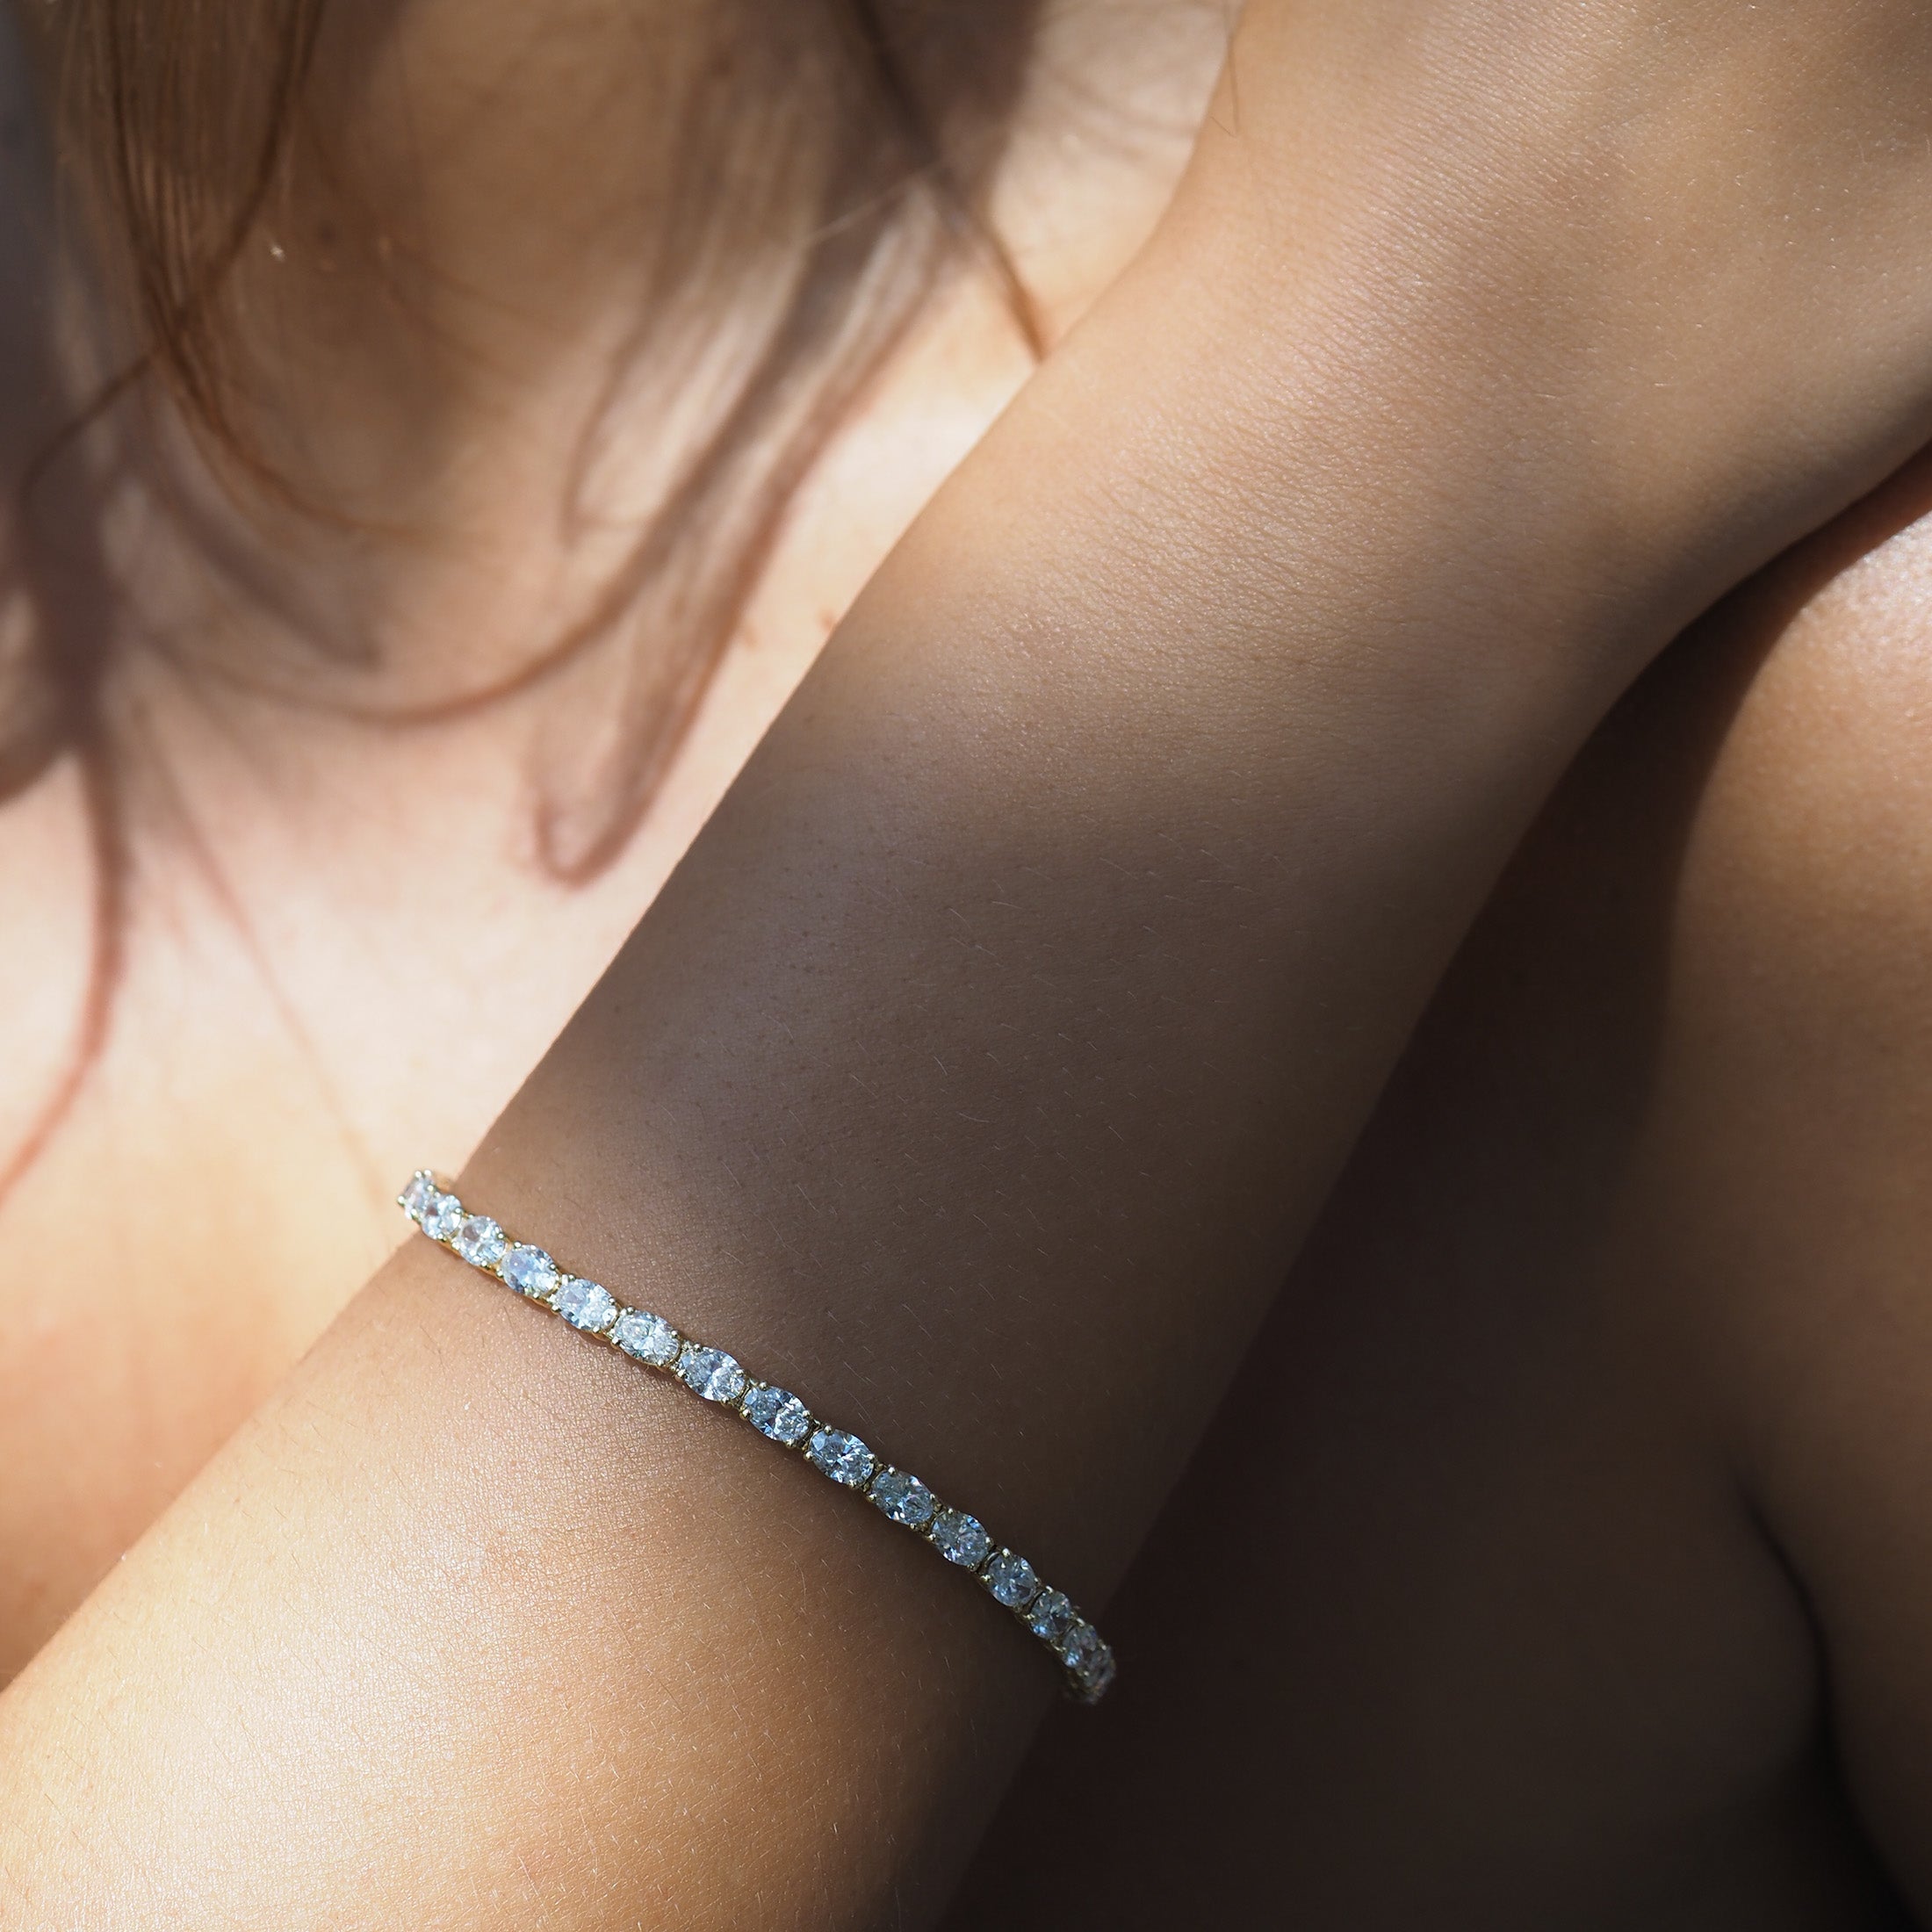 Effortlessly timeless Tennis Bracelet, featuring up to 100 expertly set Lab-Grown Diamonds offering infinite sparkle. 